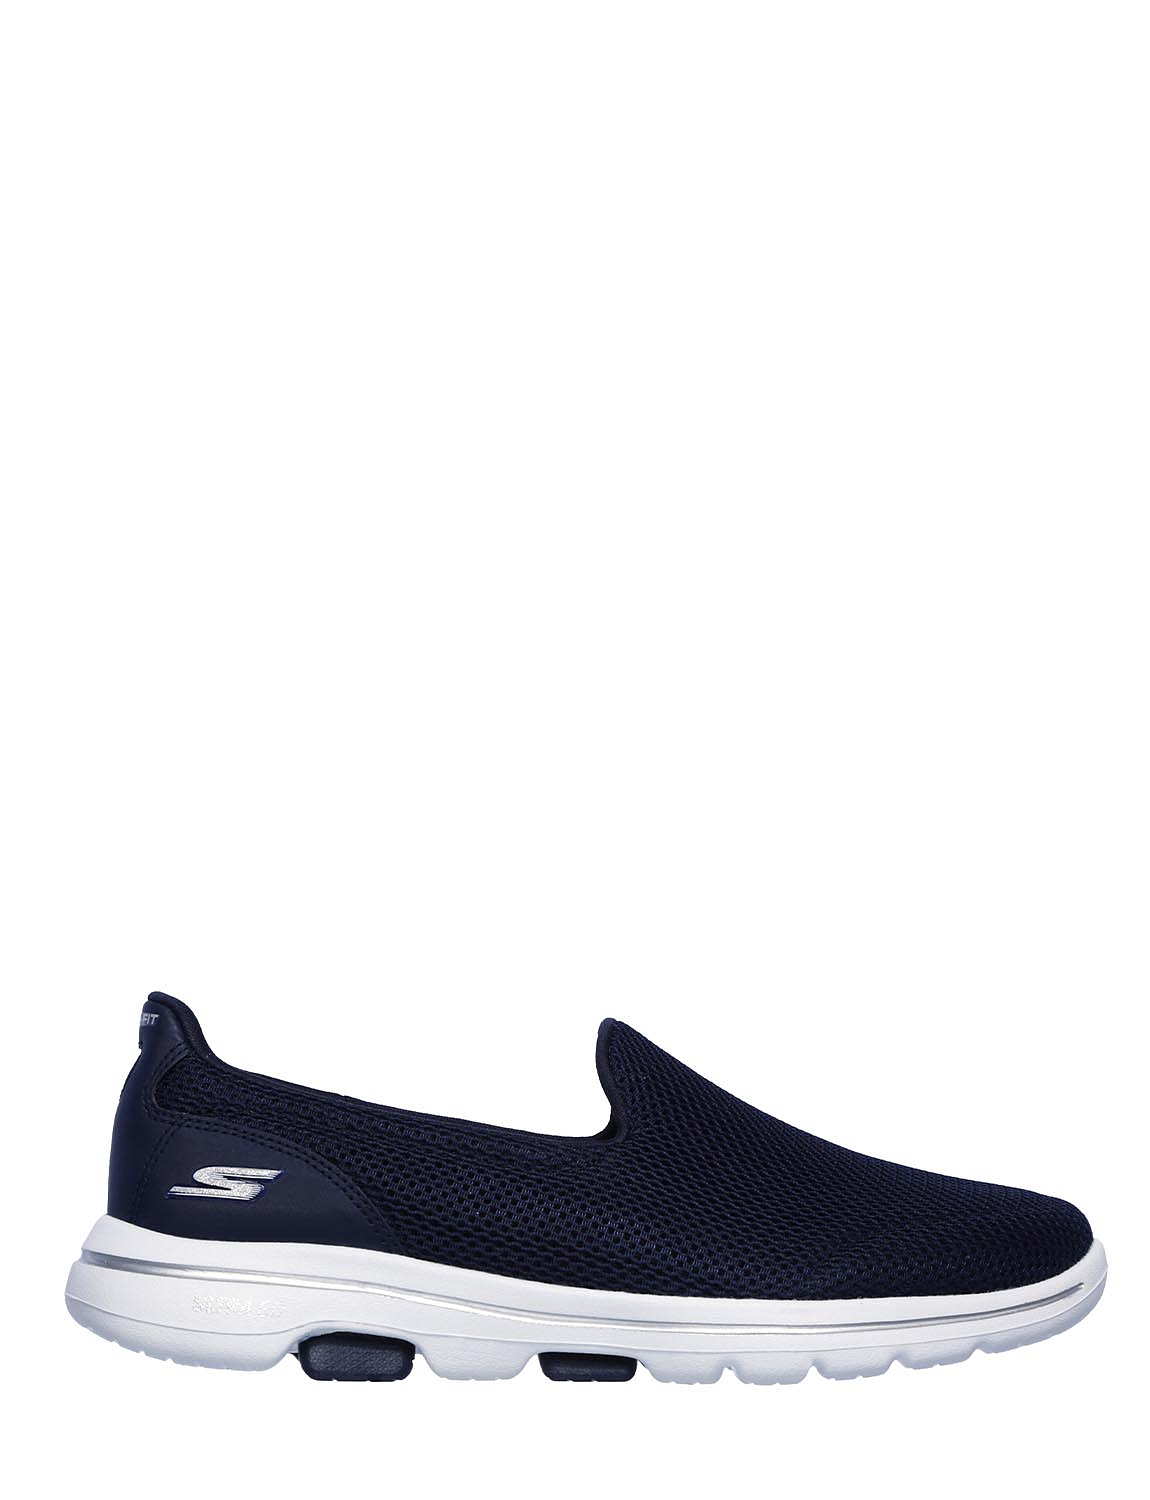 skechers wide fit casuals womens